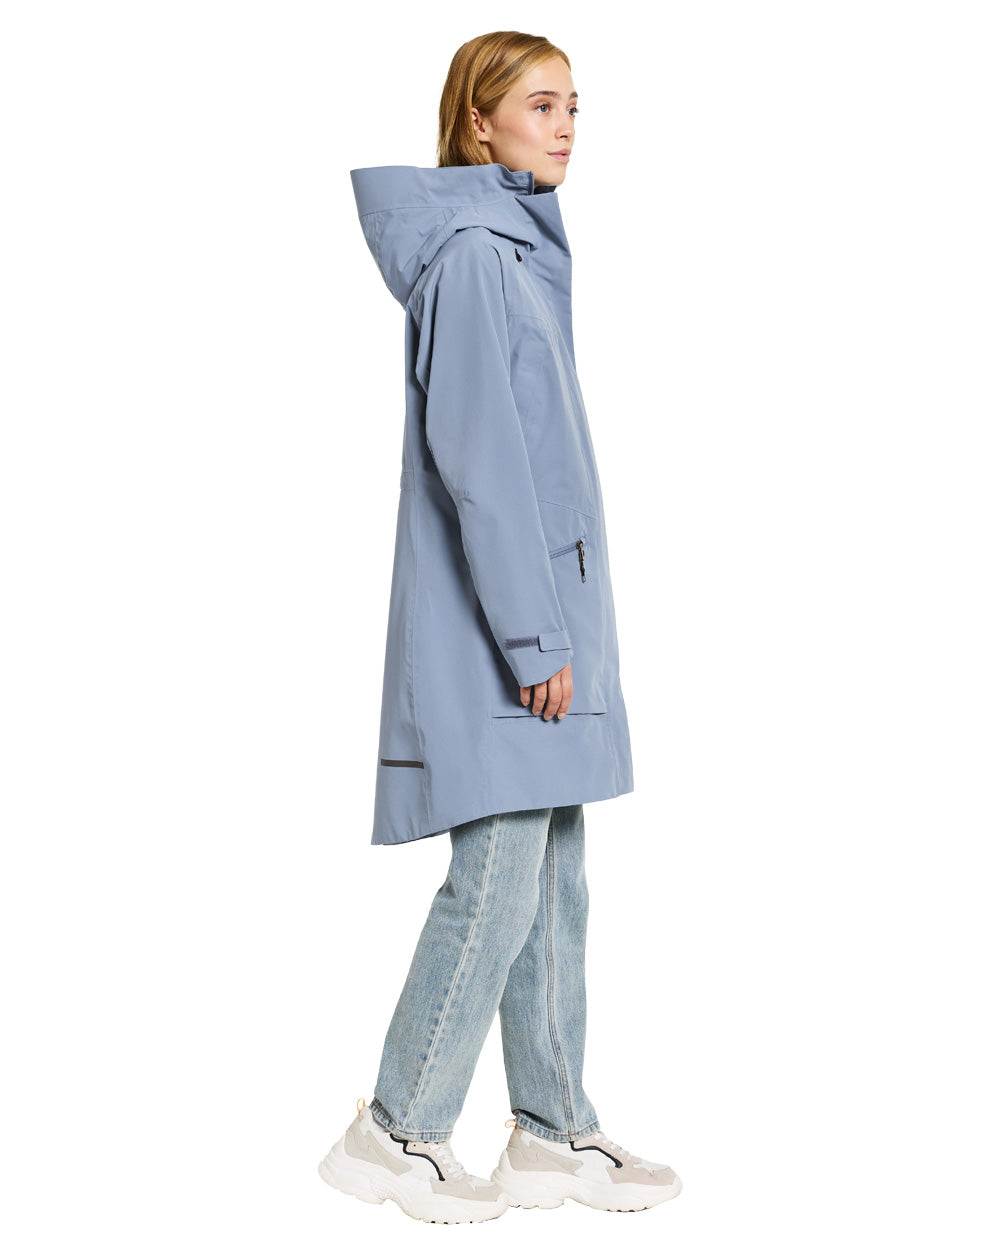 Glacial Blue coloured Didriksons Womens Parka on White background 